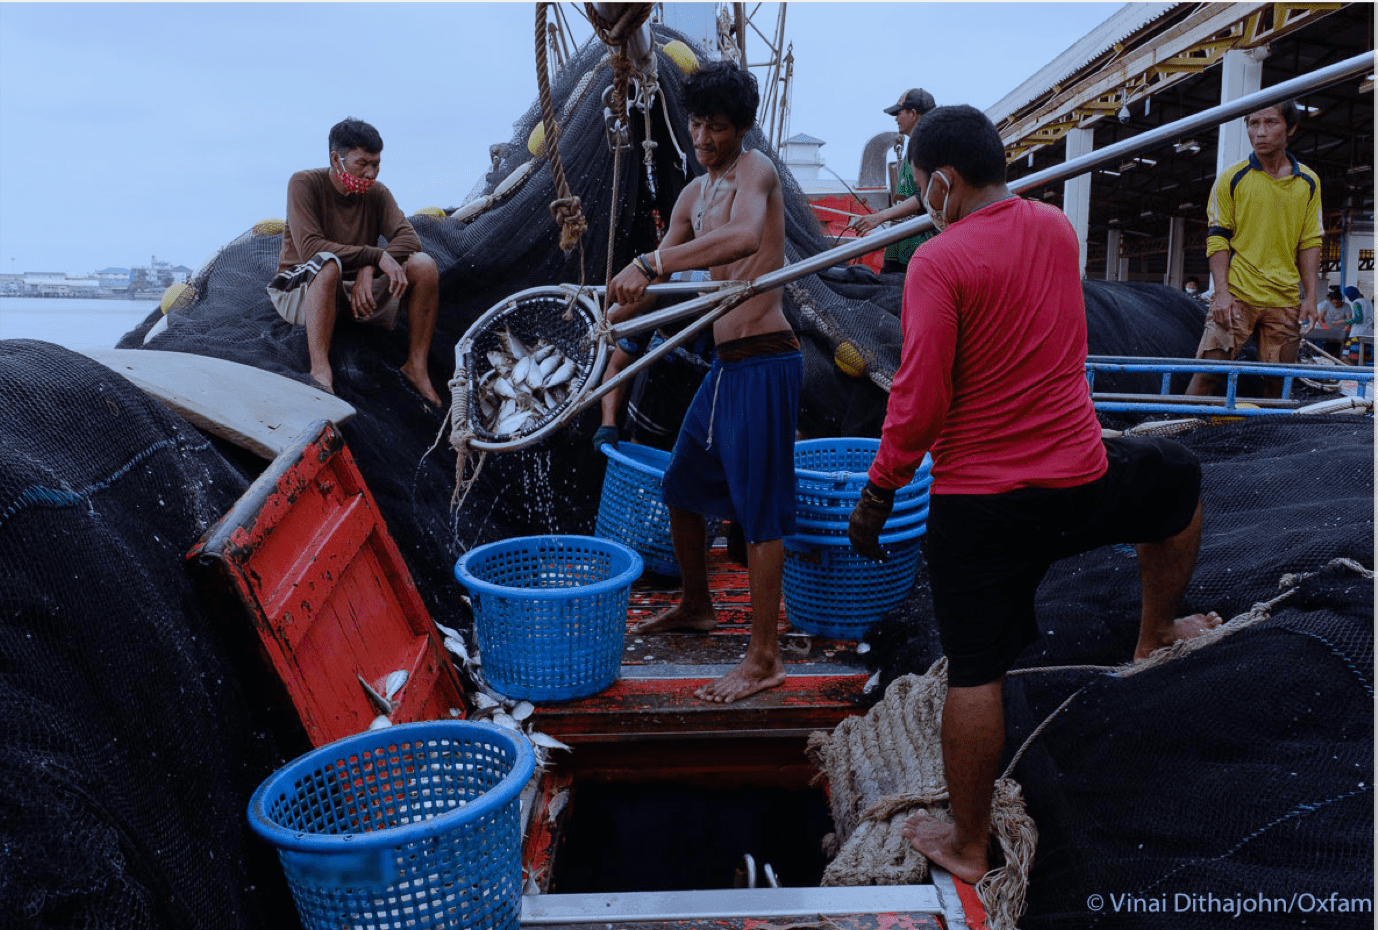 Impacts of the COVID-19 pandemic on small-scale producers and workers. Perspectives from Thailand’s seafood supply chain